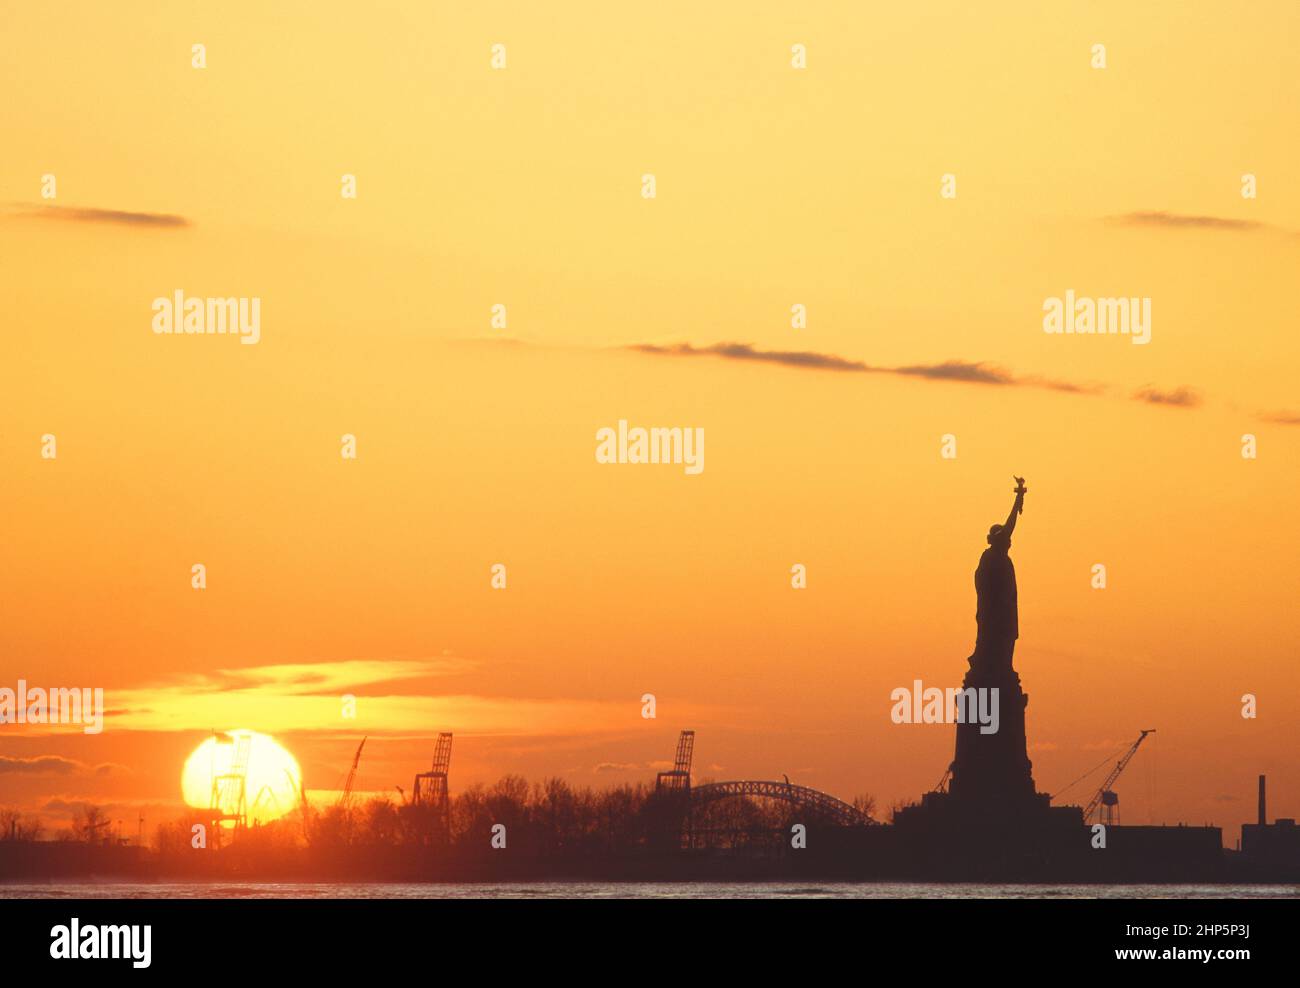 Statue of Liberty at sunset or night. New York Harbor American  landmark monument on Liberty Island. Port Elizabeth New Jersey in background. USA Stock Photo